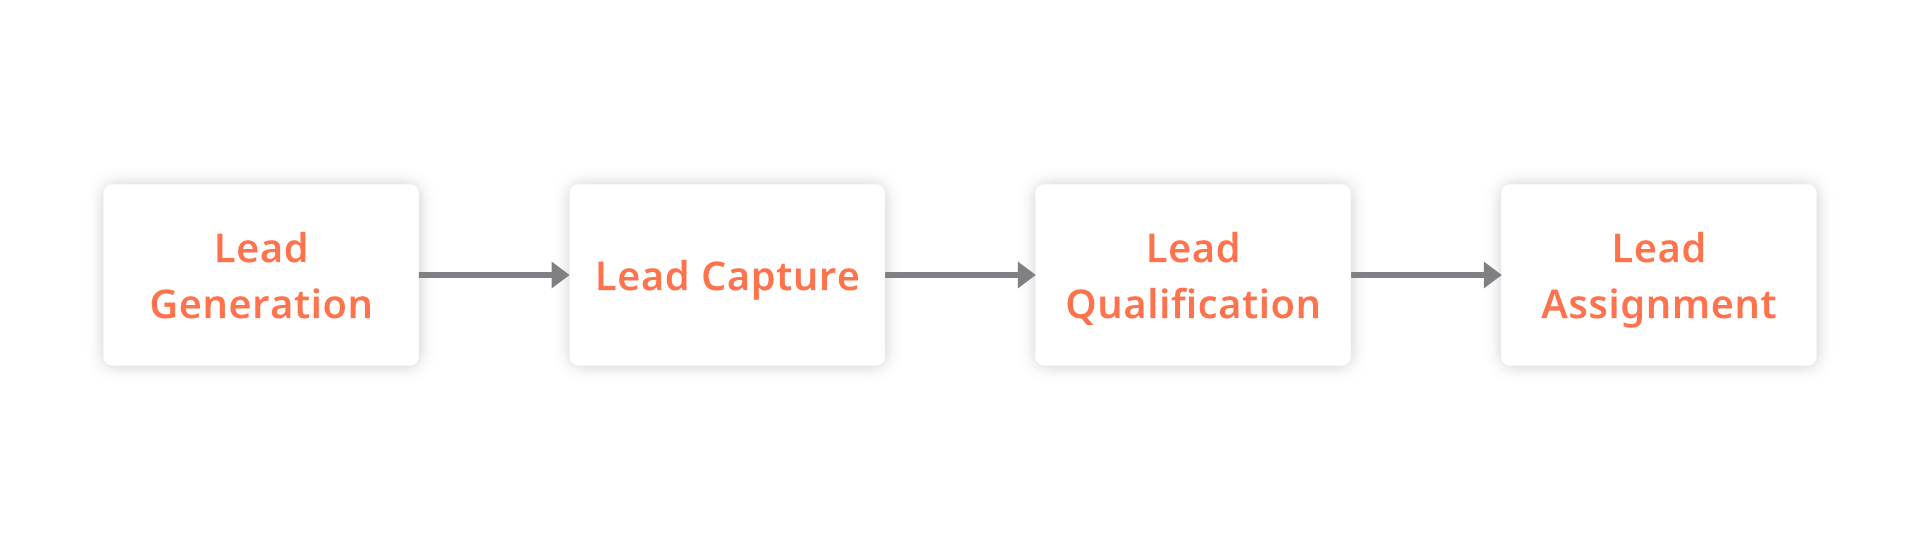 Lead Management Process Flow From Lead Generation to the Lead Assignment Stage